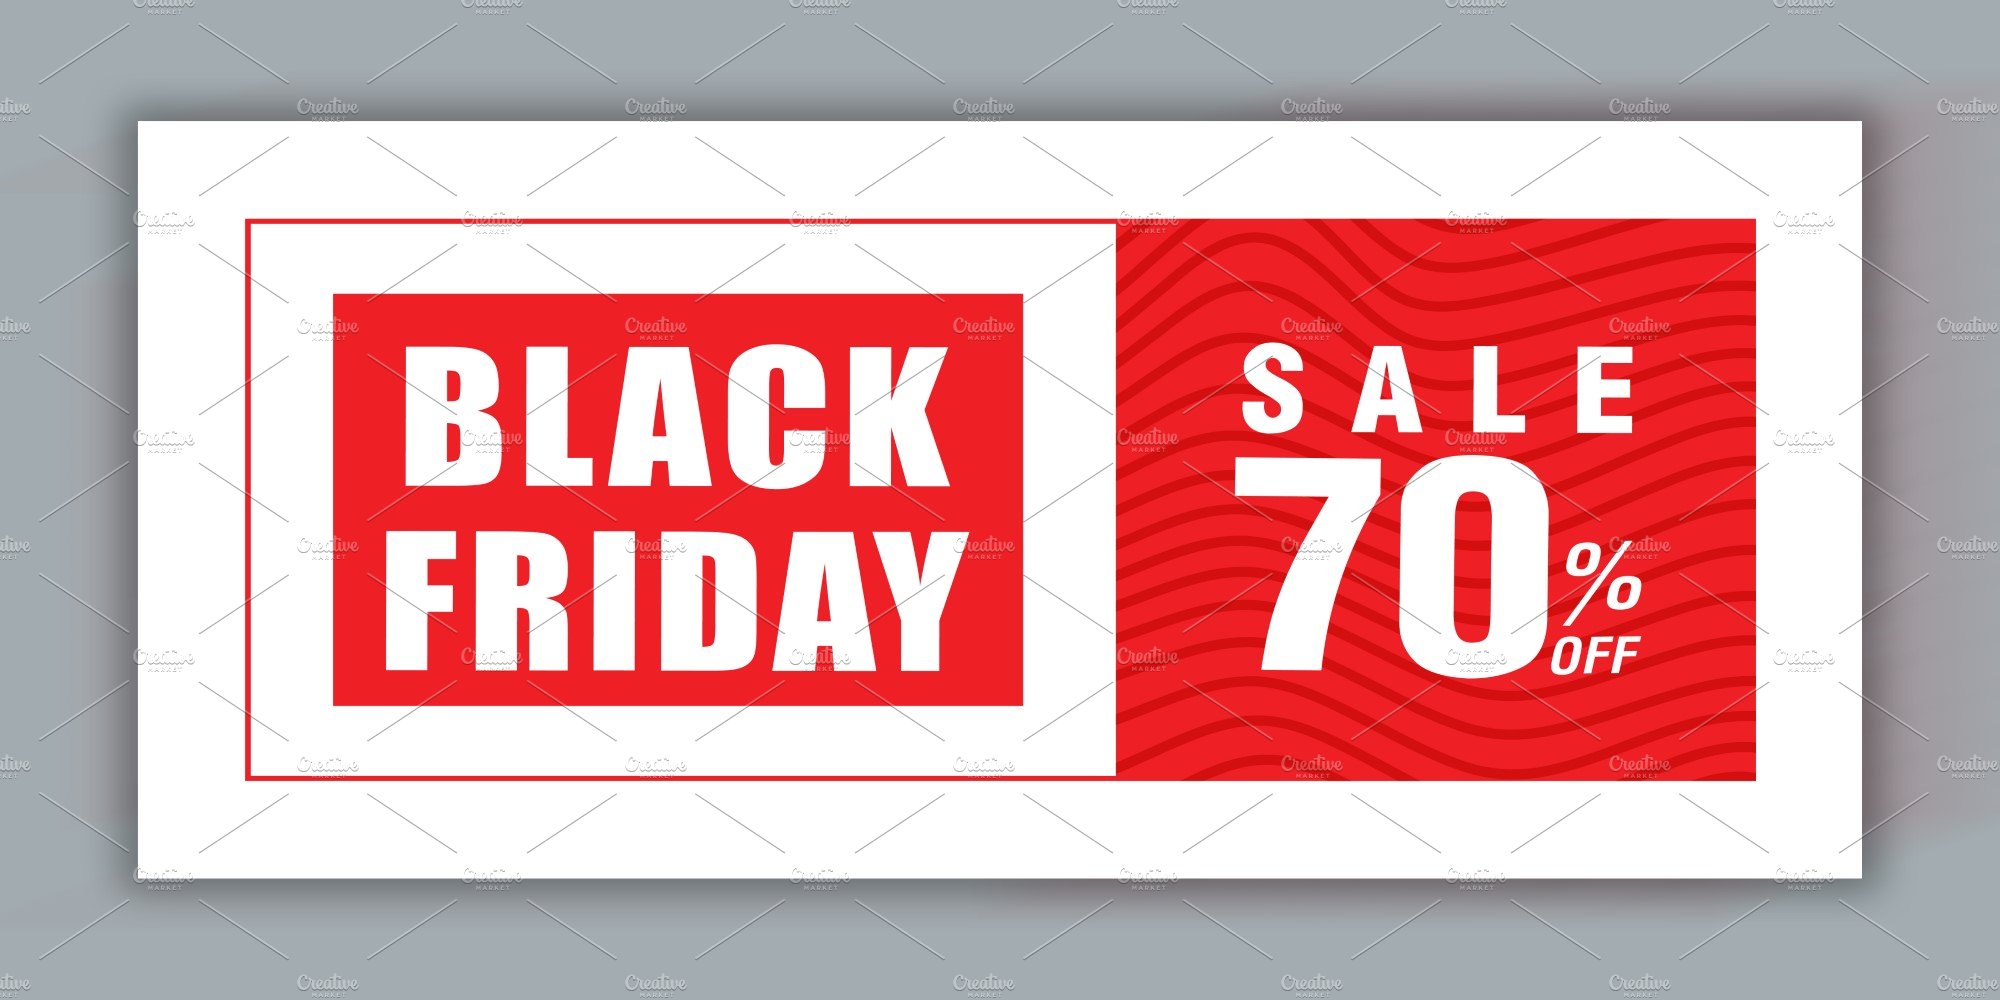 White and red banner for Black Friday sale.